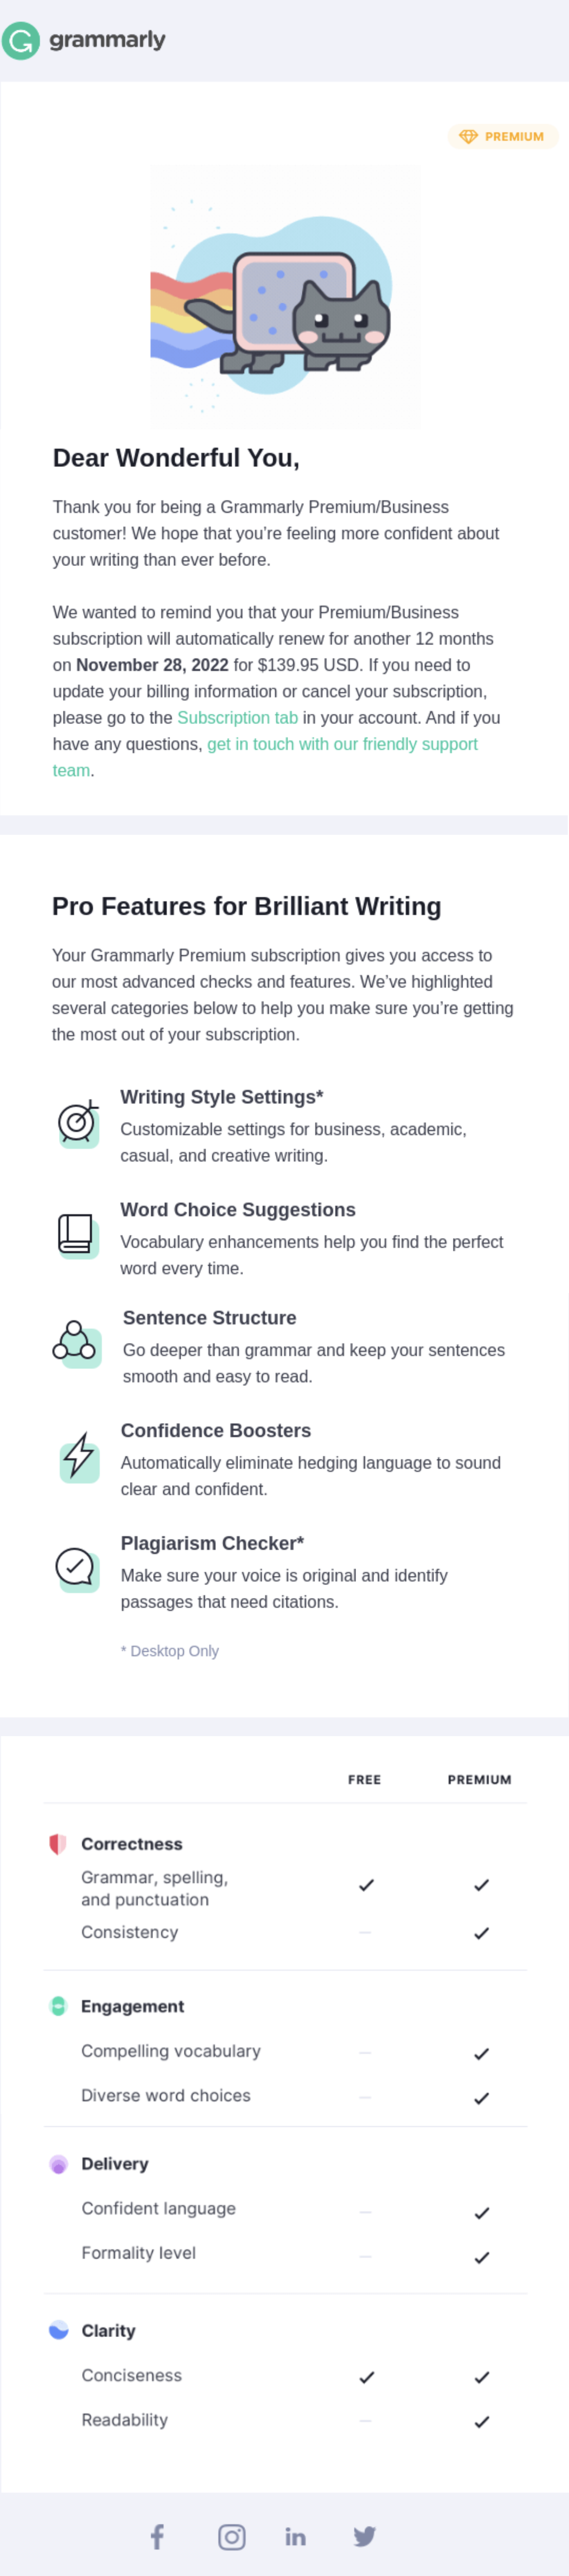 GIFs in SaaS Emails: Screenshot of Grammarly's renewal email